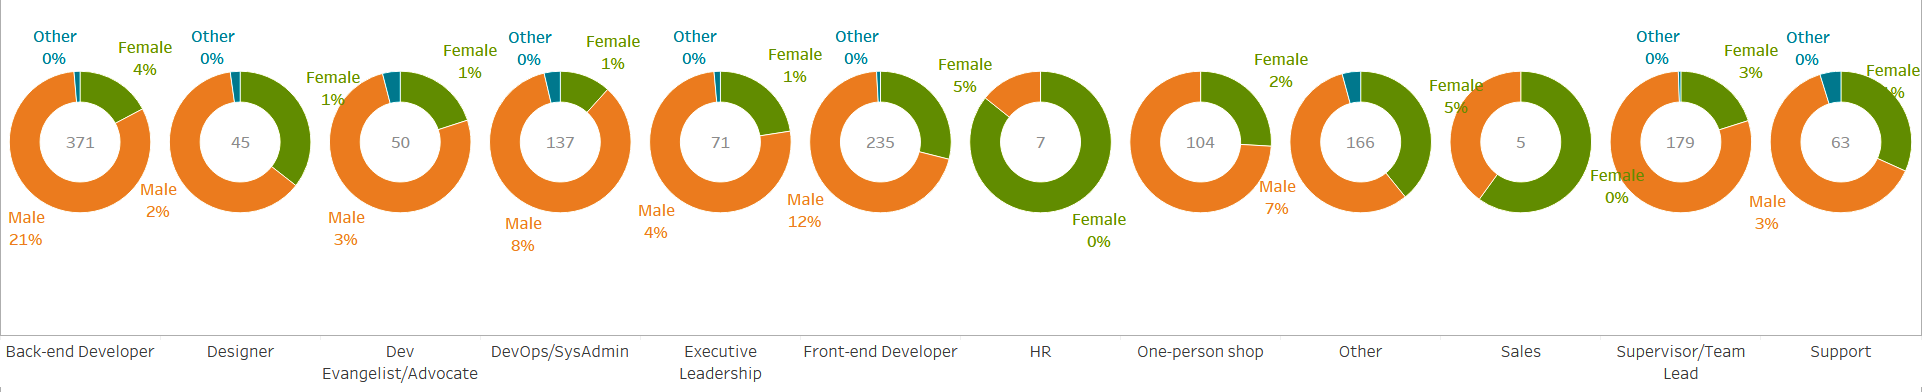 A small-multiples donut chart, which includes separating out the distribution by gender among different professions